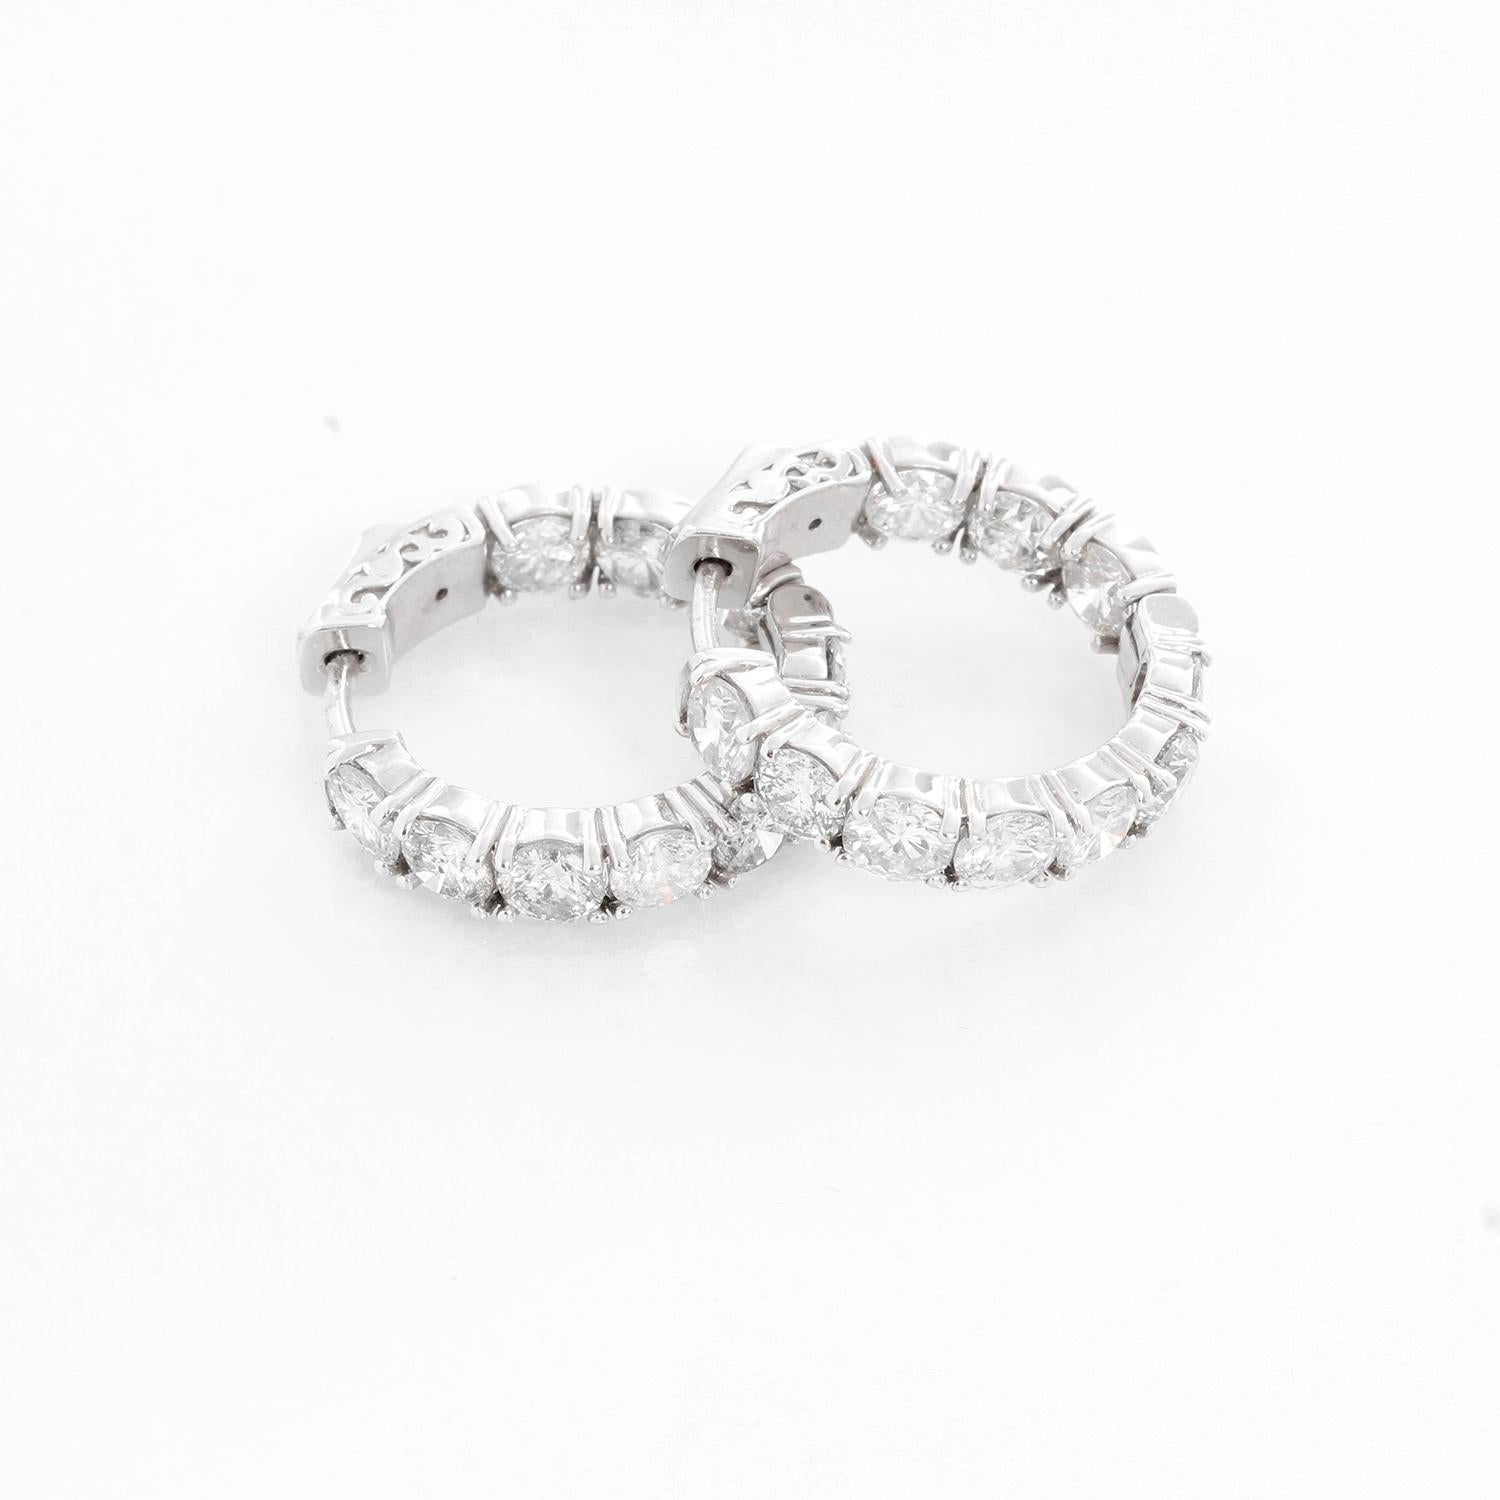 14K White Gold Diamond Hoops 5.22 cts - The earrings feature 5.22 carats of SI3-I1 clarity and G-H-I color diamonds. It is .75 apx.-inch in diameter with a total weight of 6.83  grams. Total 20 stones.